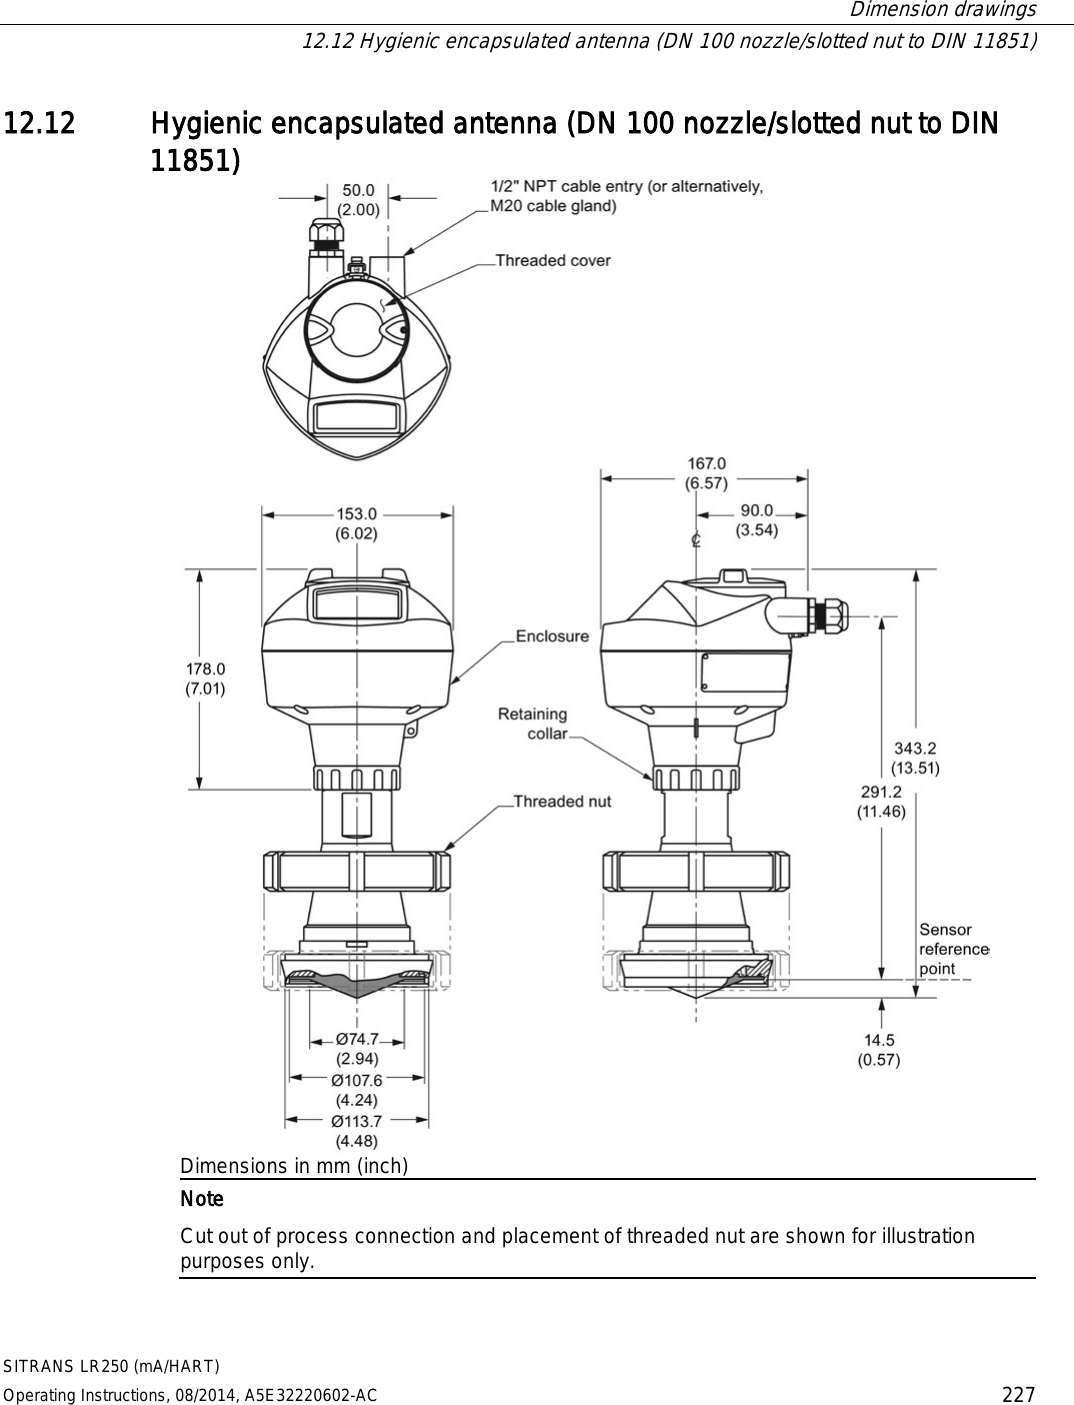  Dimension drawings  12.12 Hygienic encapsulated antenna (DN 100 nozzle/slotted nut to DIN 11851) SITRANS LR250 (mA/HART) Operating Instructions, 08/2014, A5E32220602-AC 227 12.12 Hygienic encapsulated antenna (DN 100 nozzle/slotted nut to DIN 11851)  Dimensions in mm (inch)  Note Cut out of process connection and placement of threaded nut are shown for illustration purposes only. 